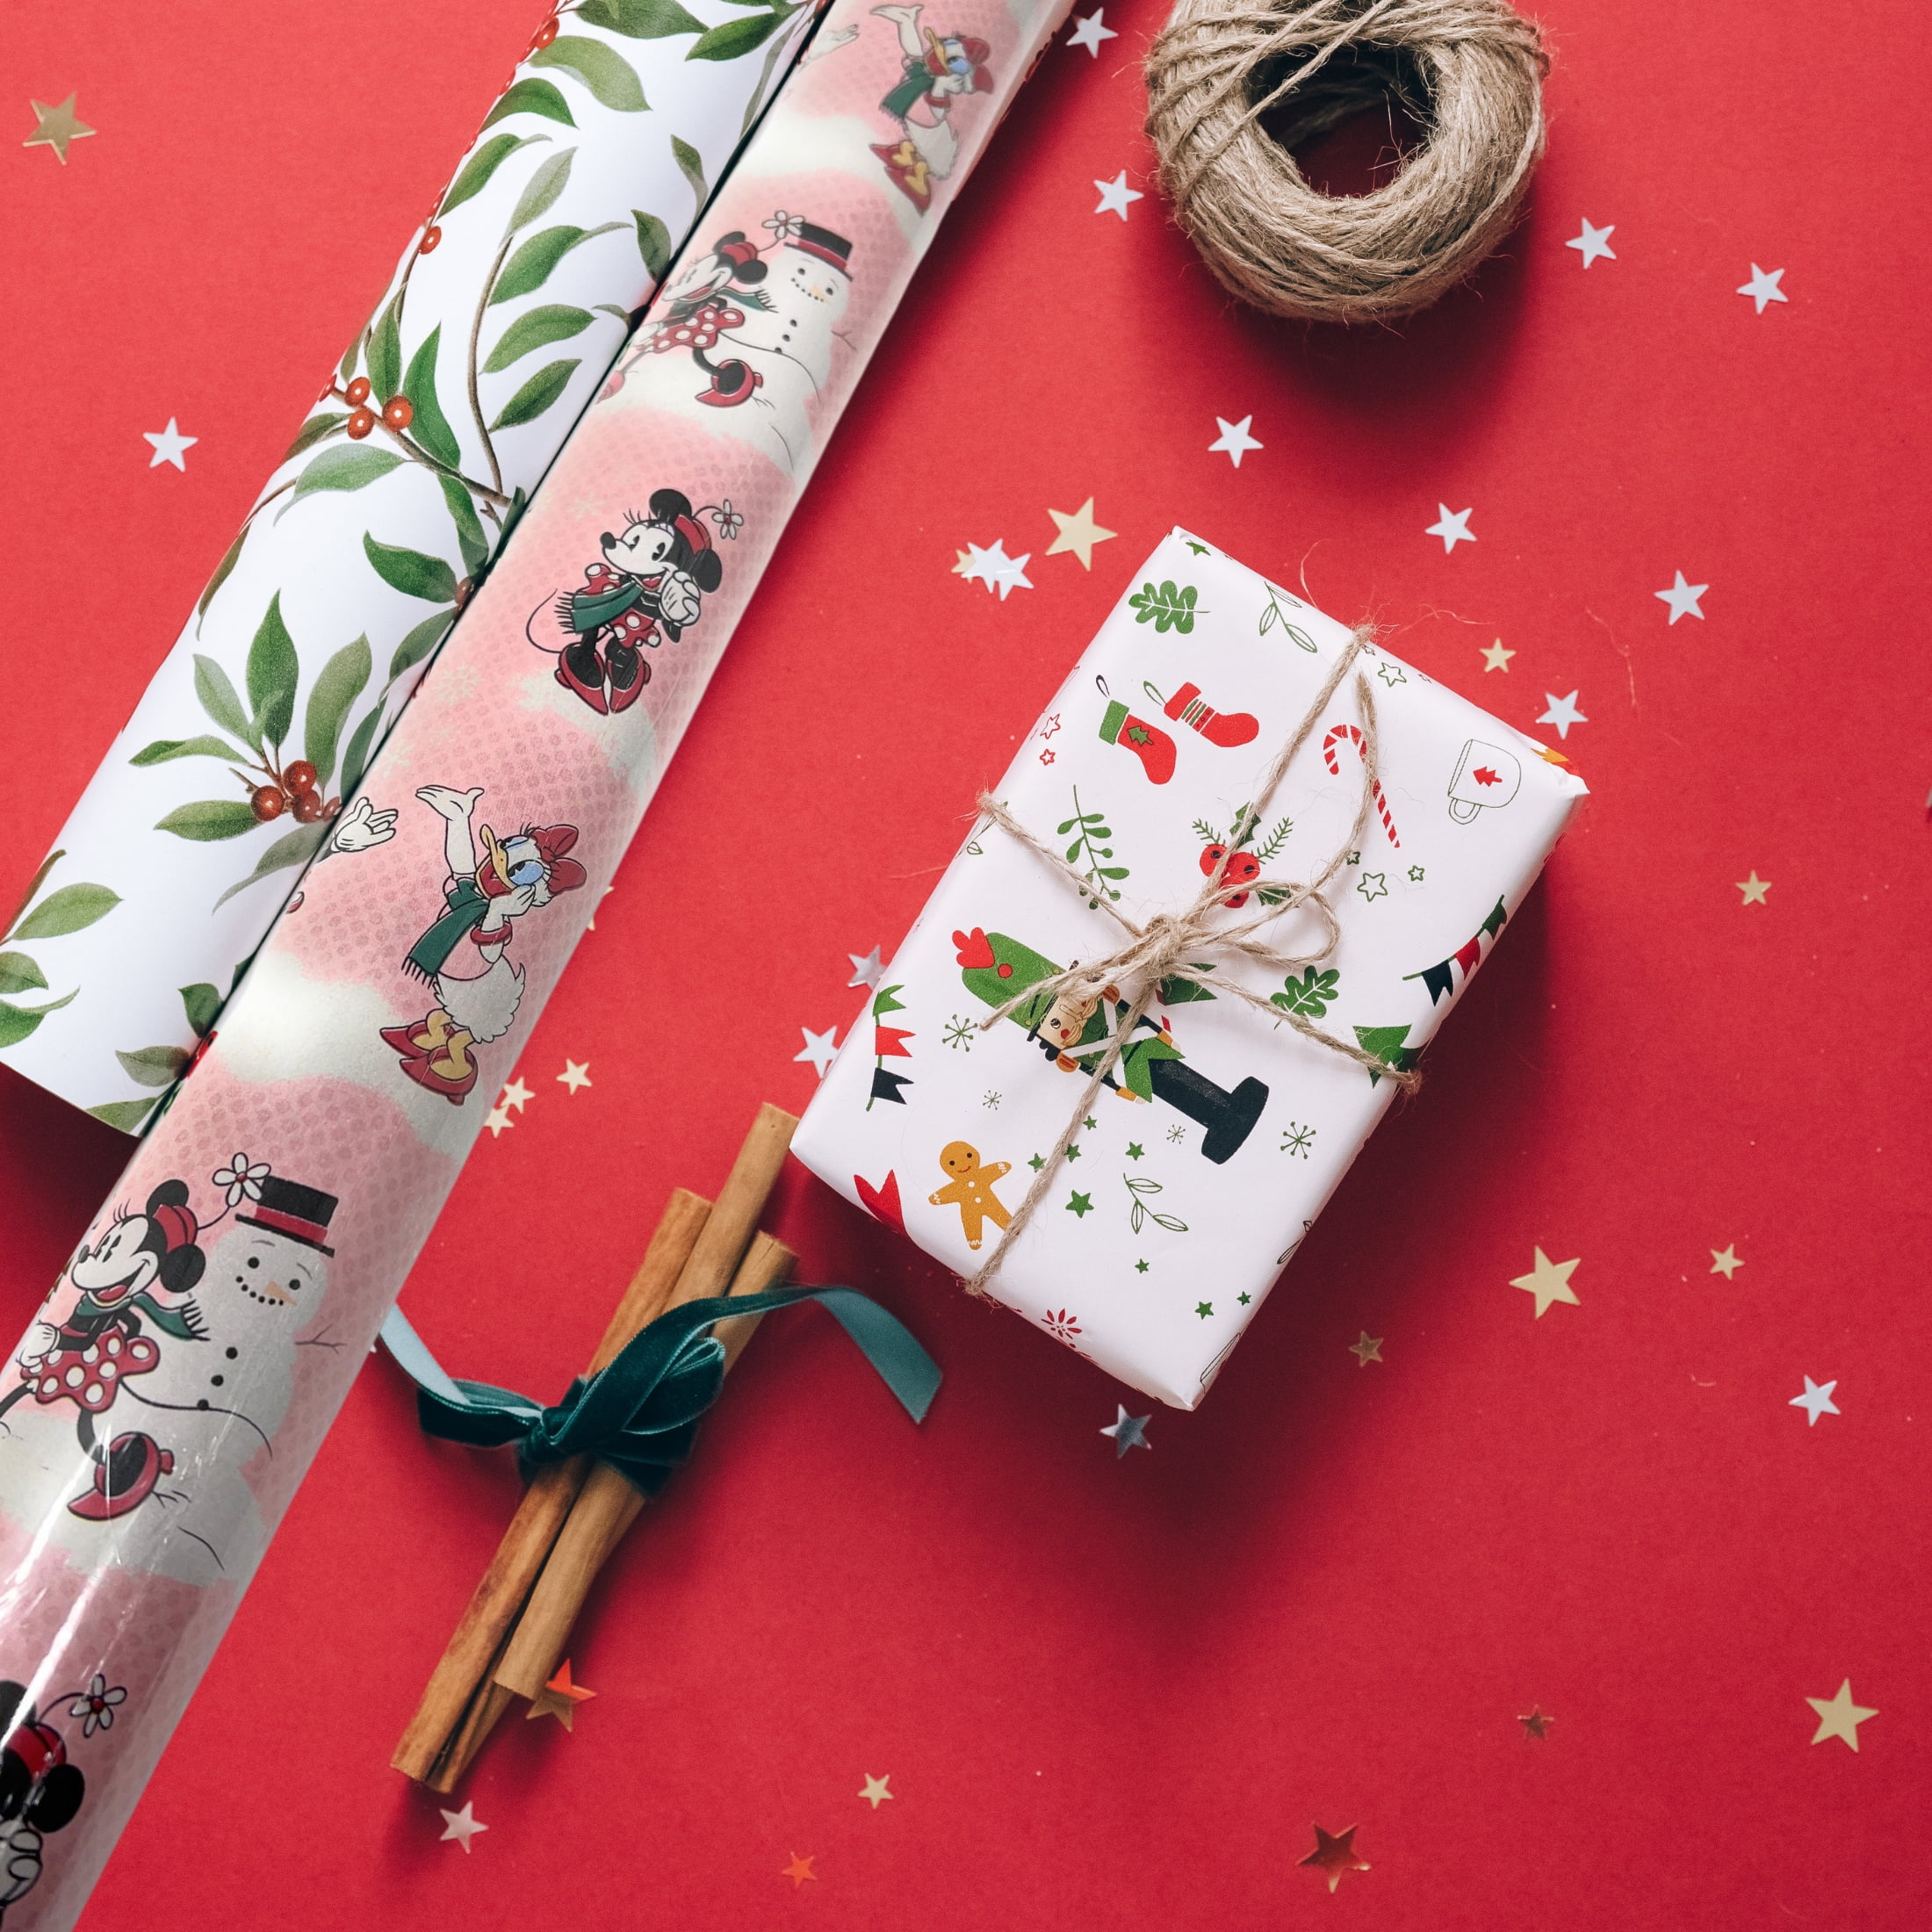 Wrapping Paper Gift for Christmas – Fun-Squared